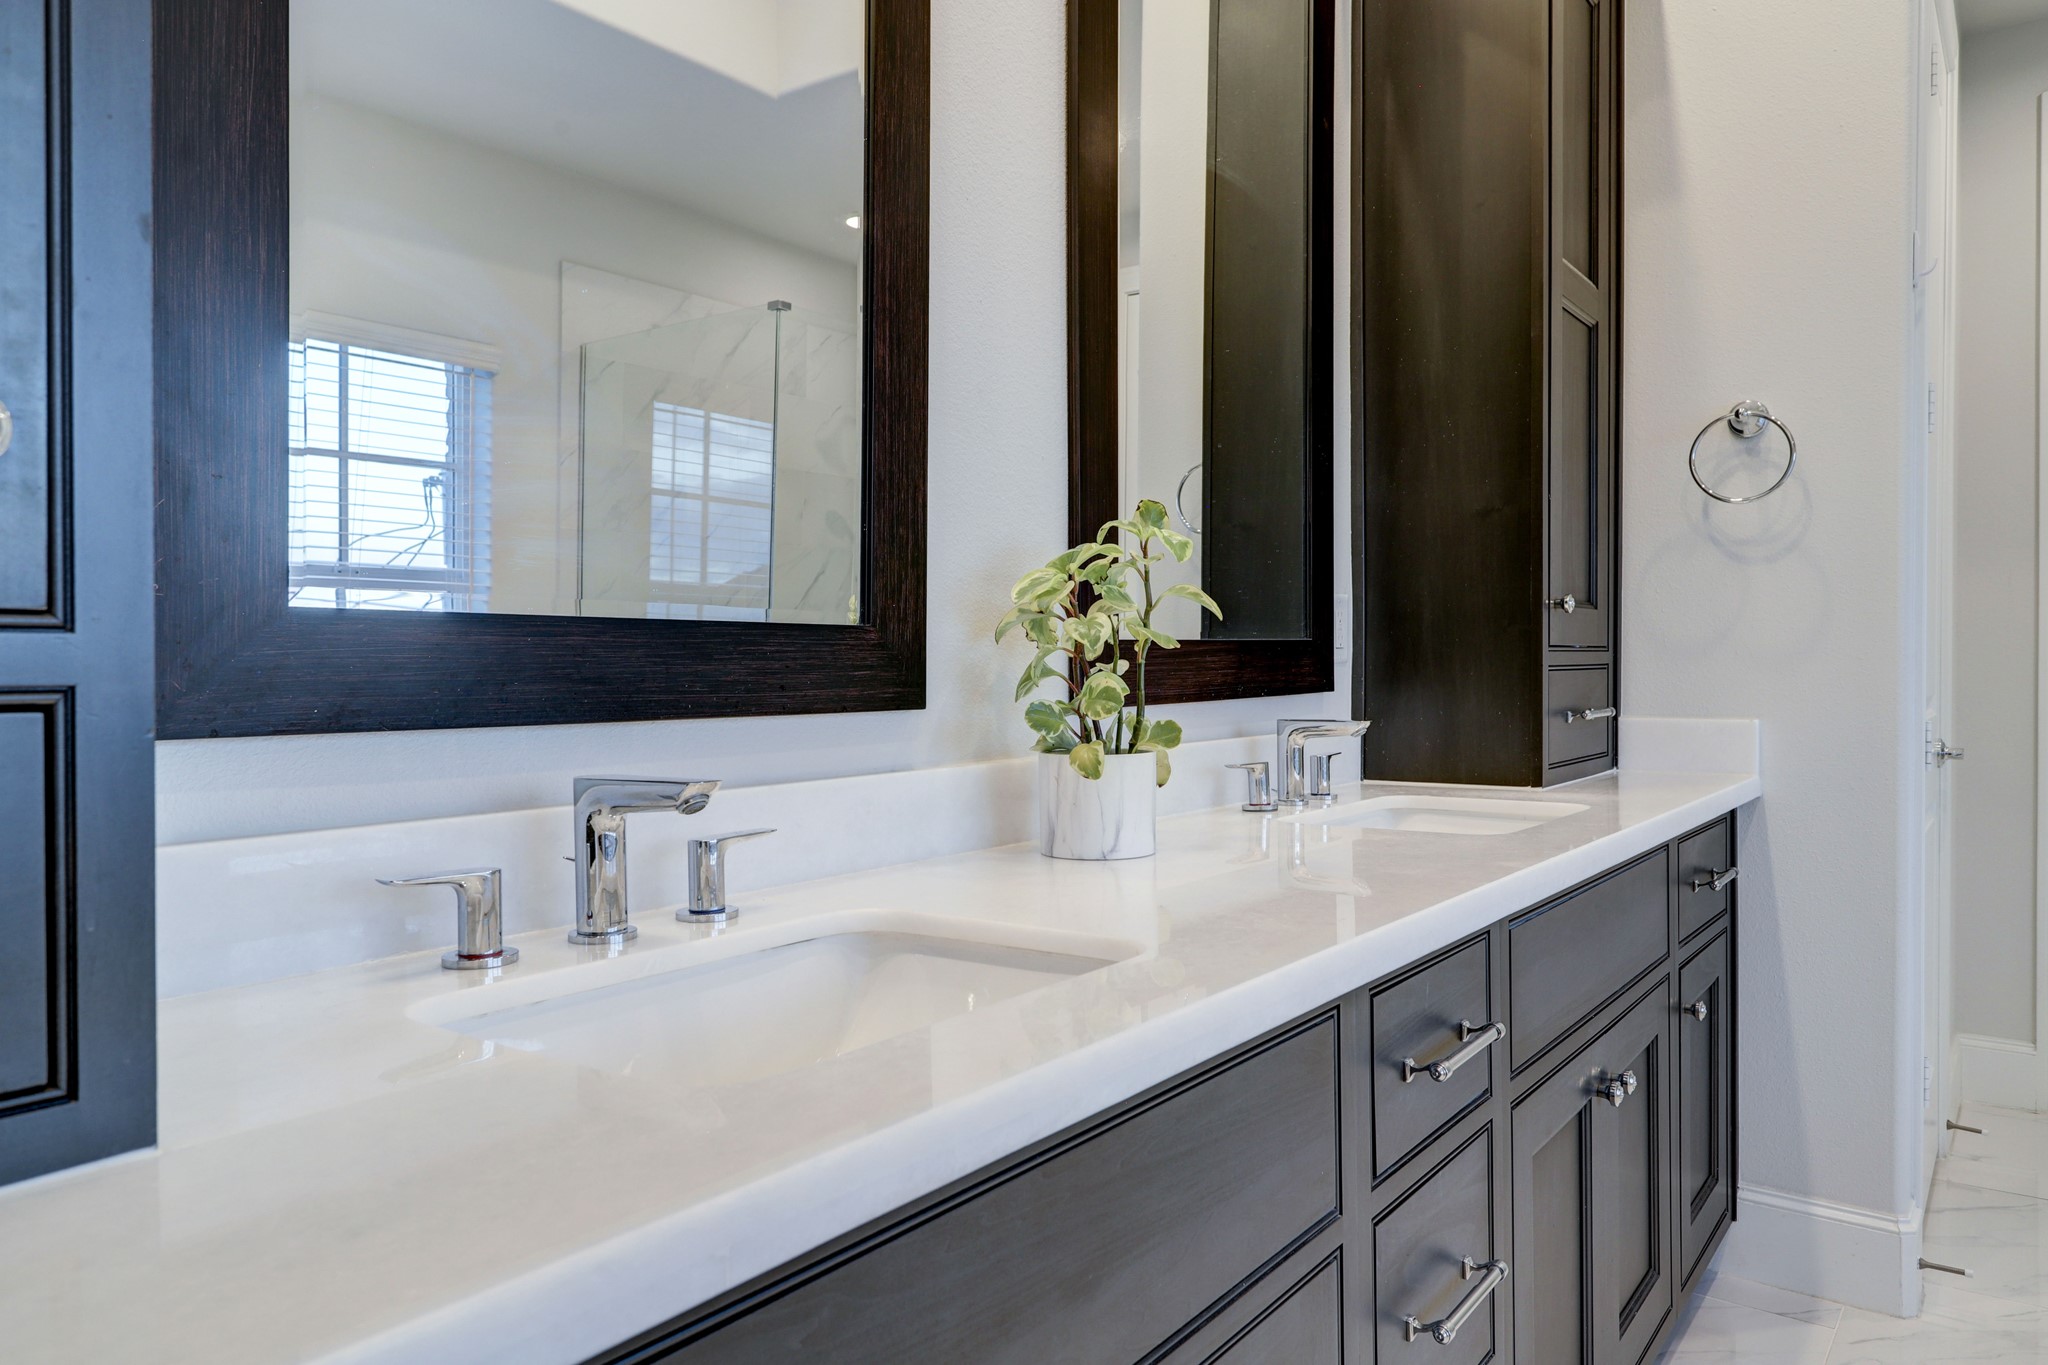 Dual vanities atop soft close drawers and cabinets with sleek chrome finished pulls and fixtures.